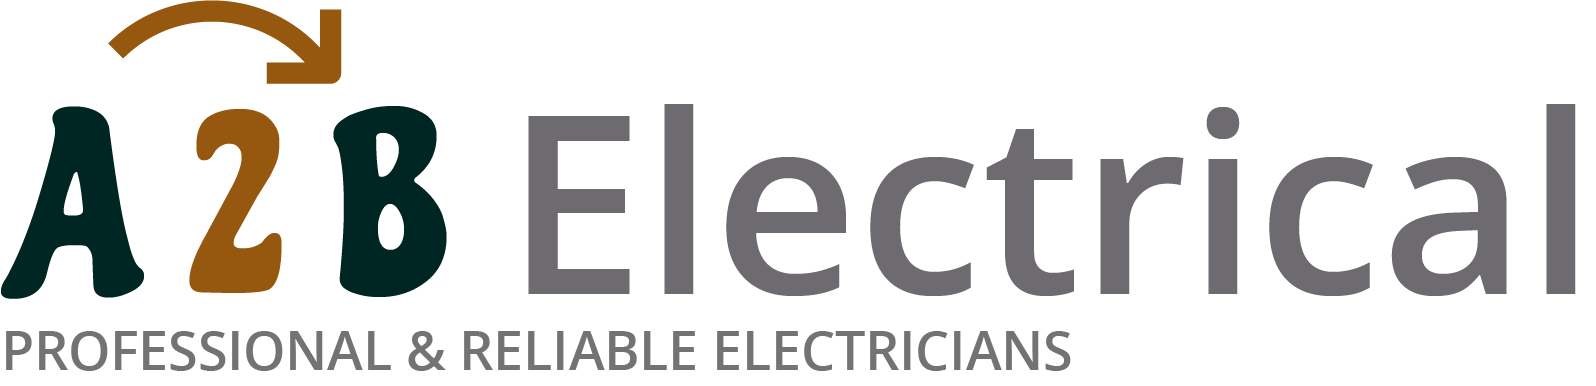 If you have electrical wiring problems in Harlow, we can provide an electrician to have a look for you. 